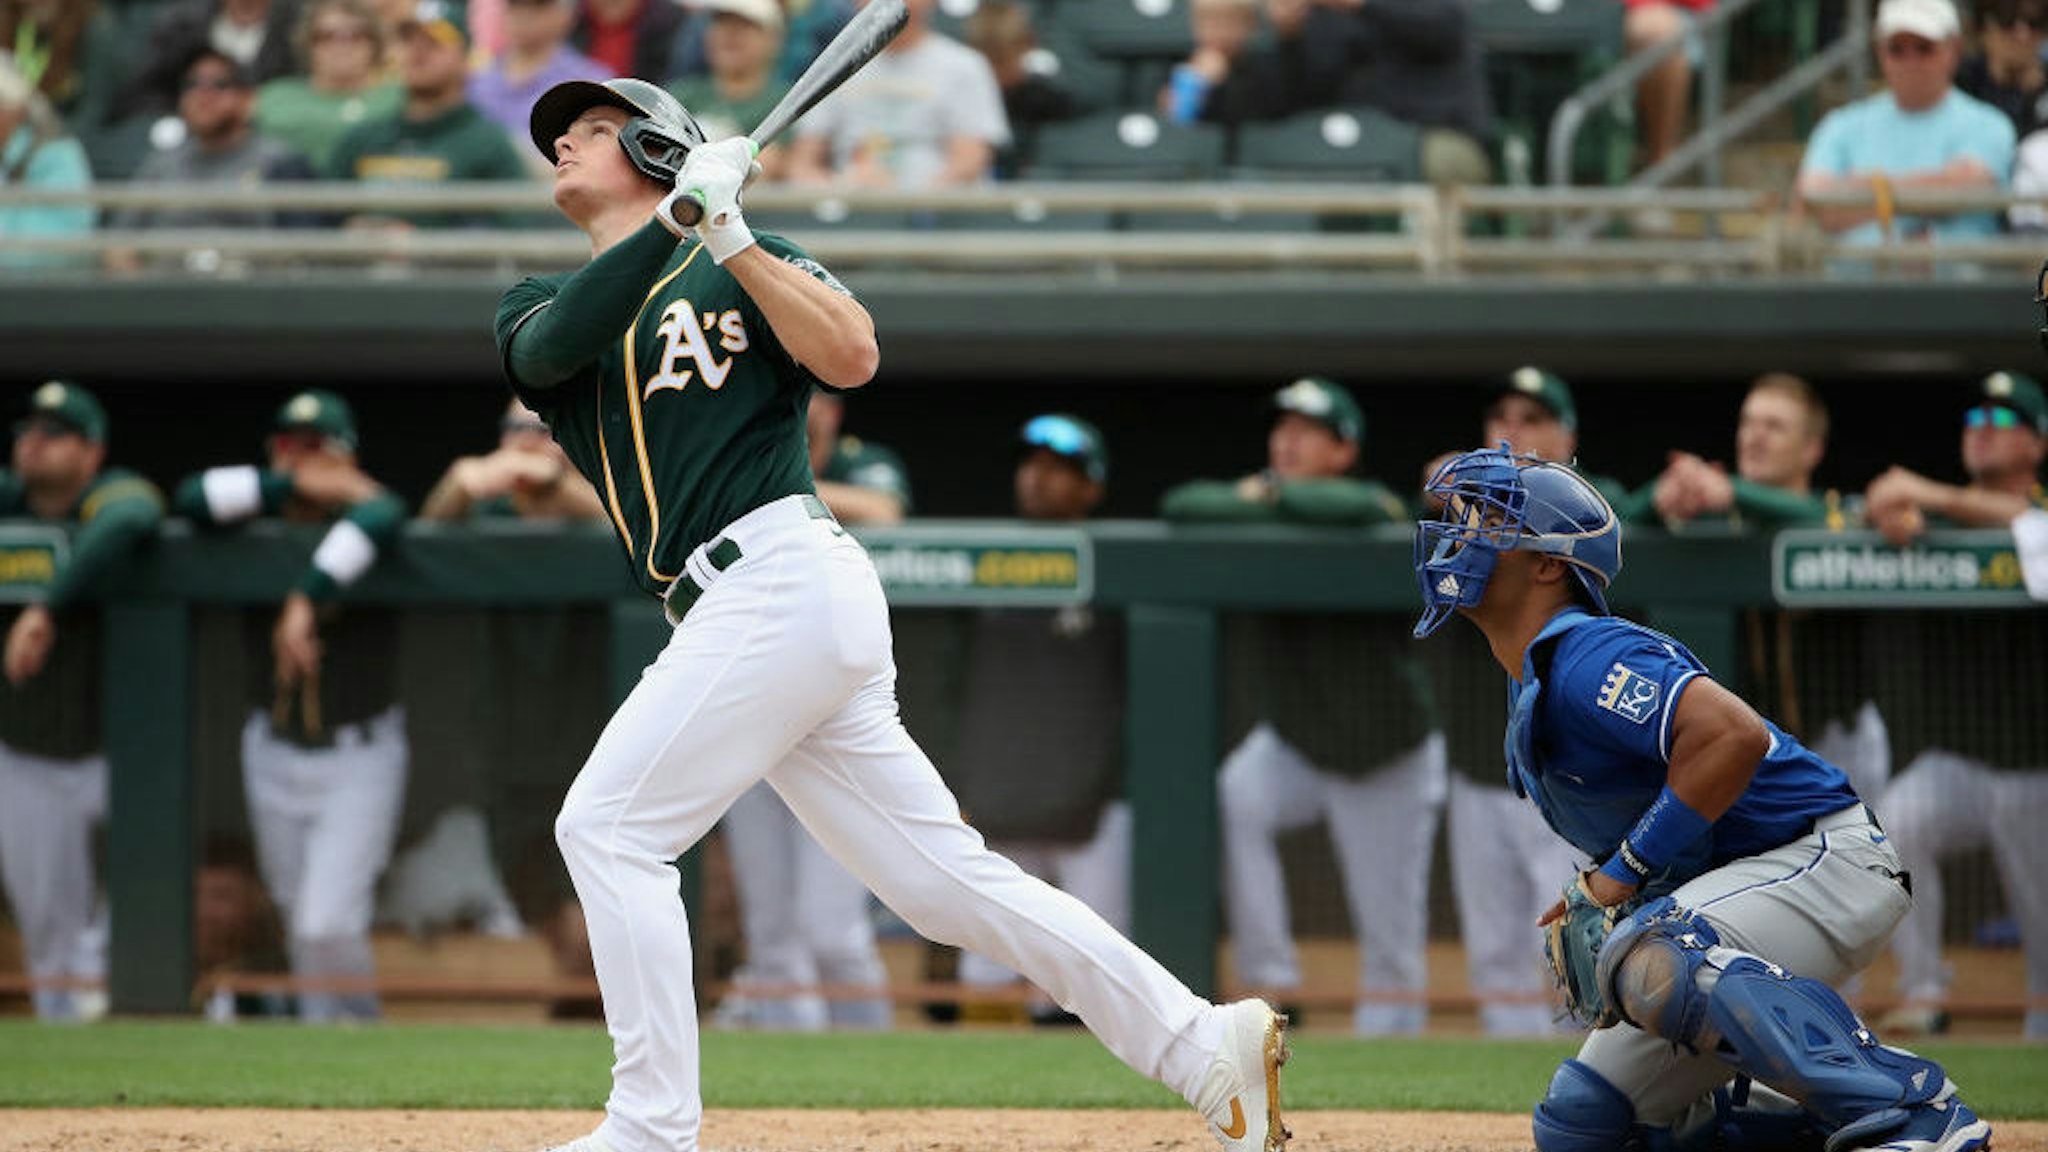 Matt Chapman #26 of the Oakland Athletics bats against the Kansas City Royals during the MLB spring training game at HoHoKam Stadium on March 10, 2020 in Mesa, Arizona. (Photo by Christian Petersen/Getty Images)